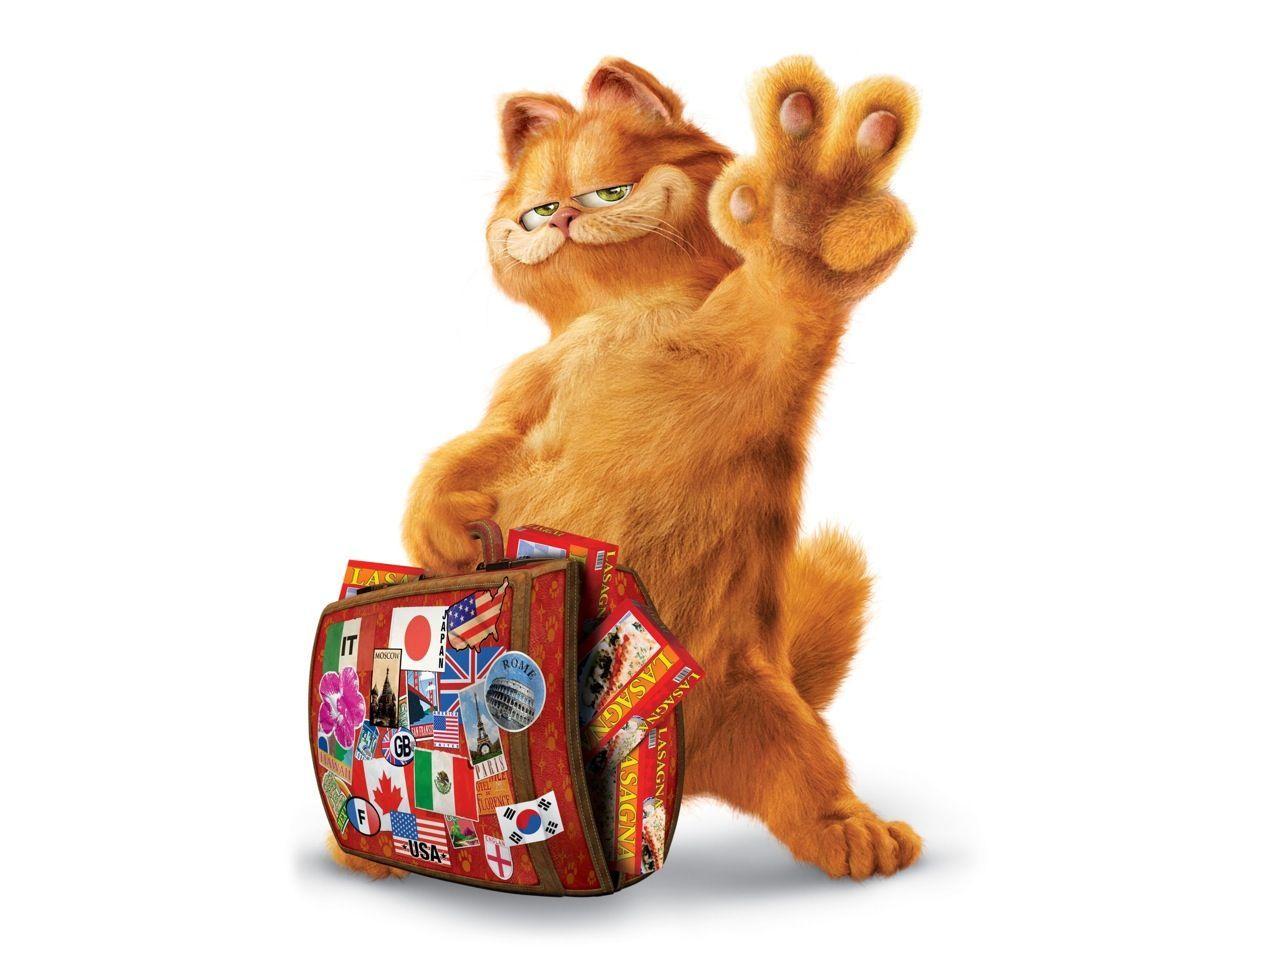 Garfield on Holiday Wallpaper Free For Android. Garfield & friends